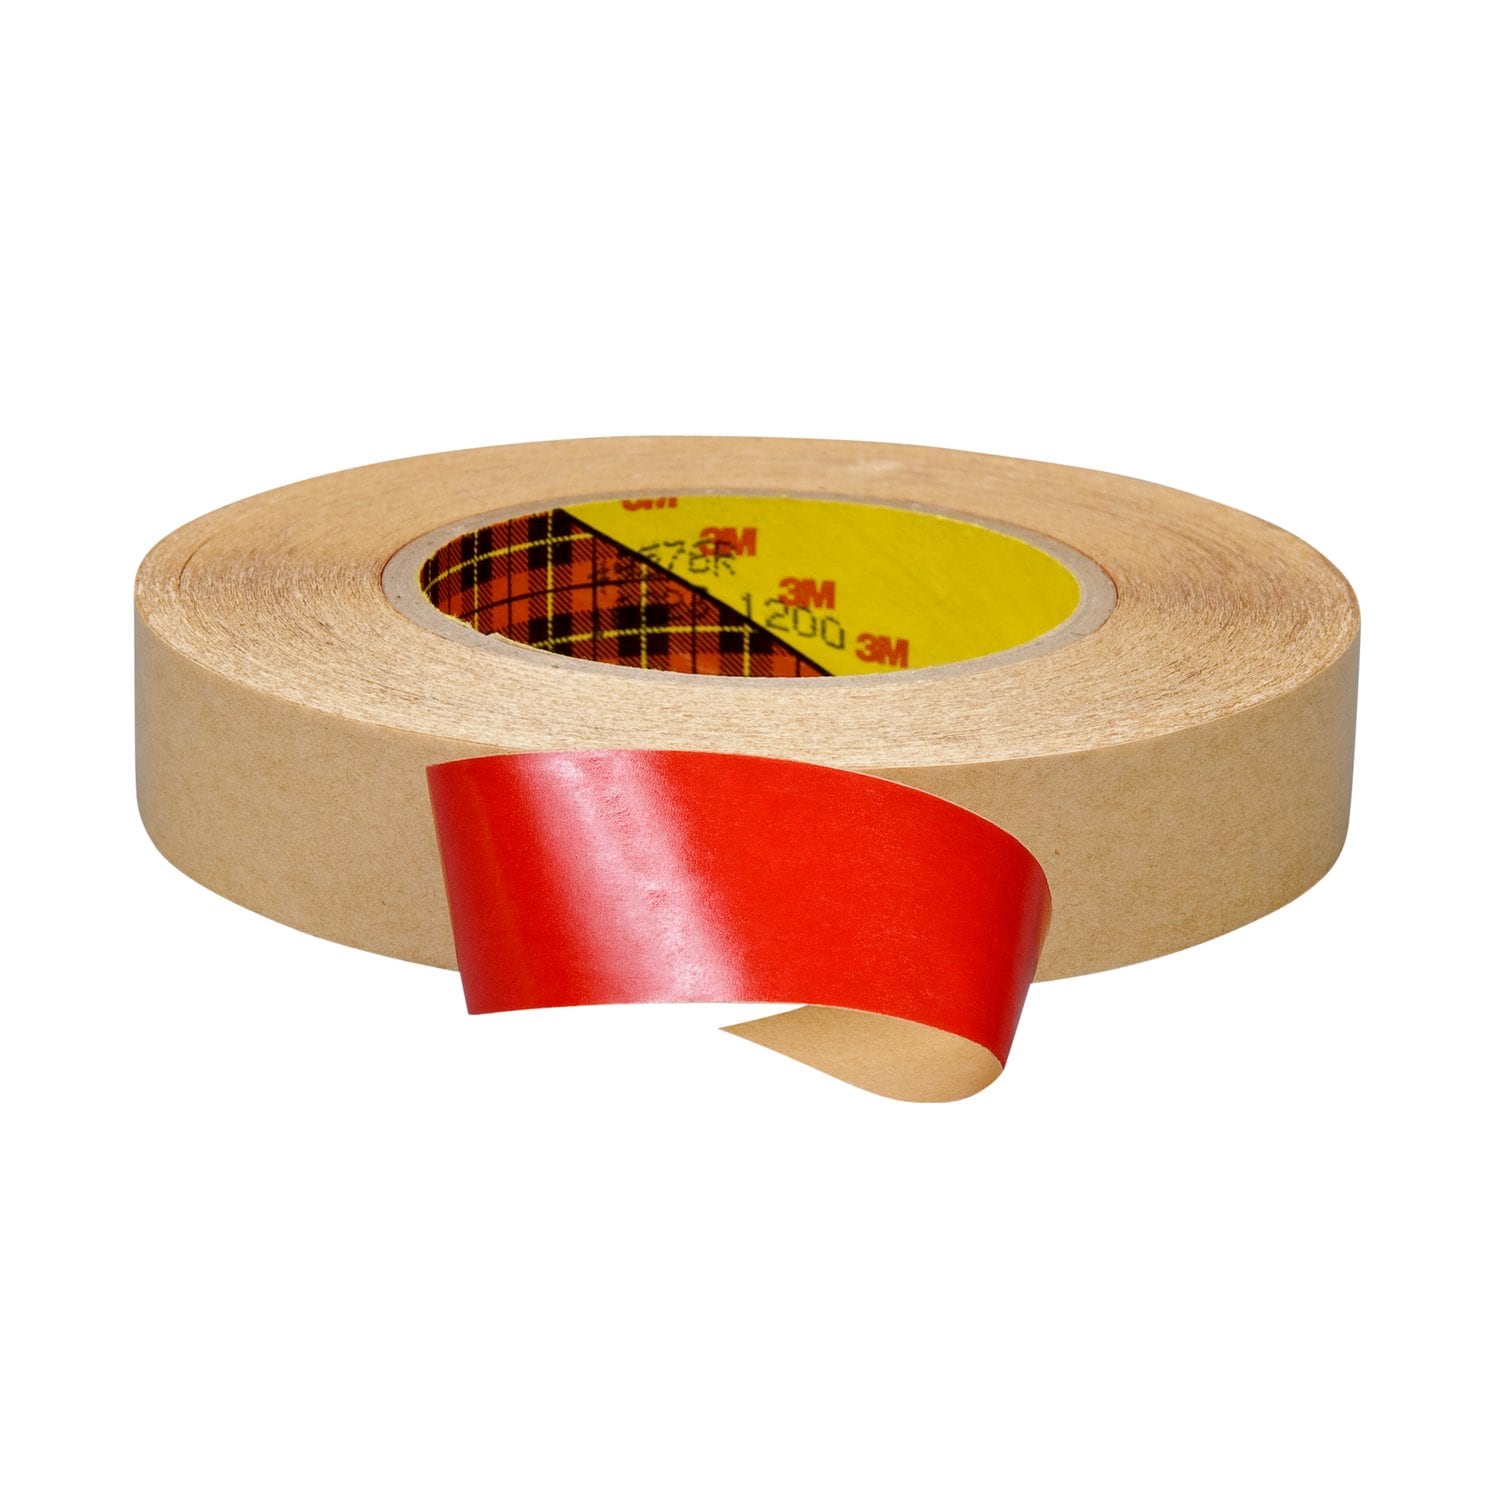 7000123825 - 3M Double Coated Tape 9576R, Red, 1 in x 60 yd, 4 mil, 36 rolls per
case